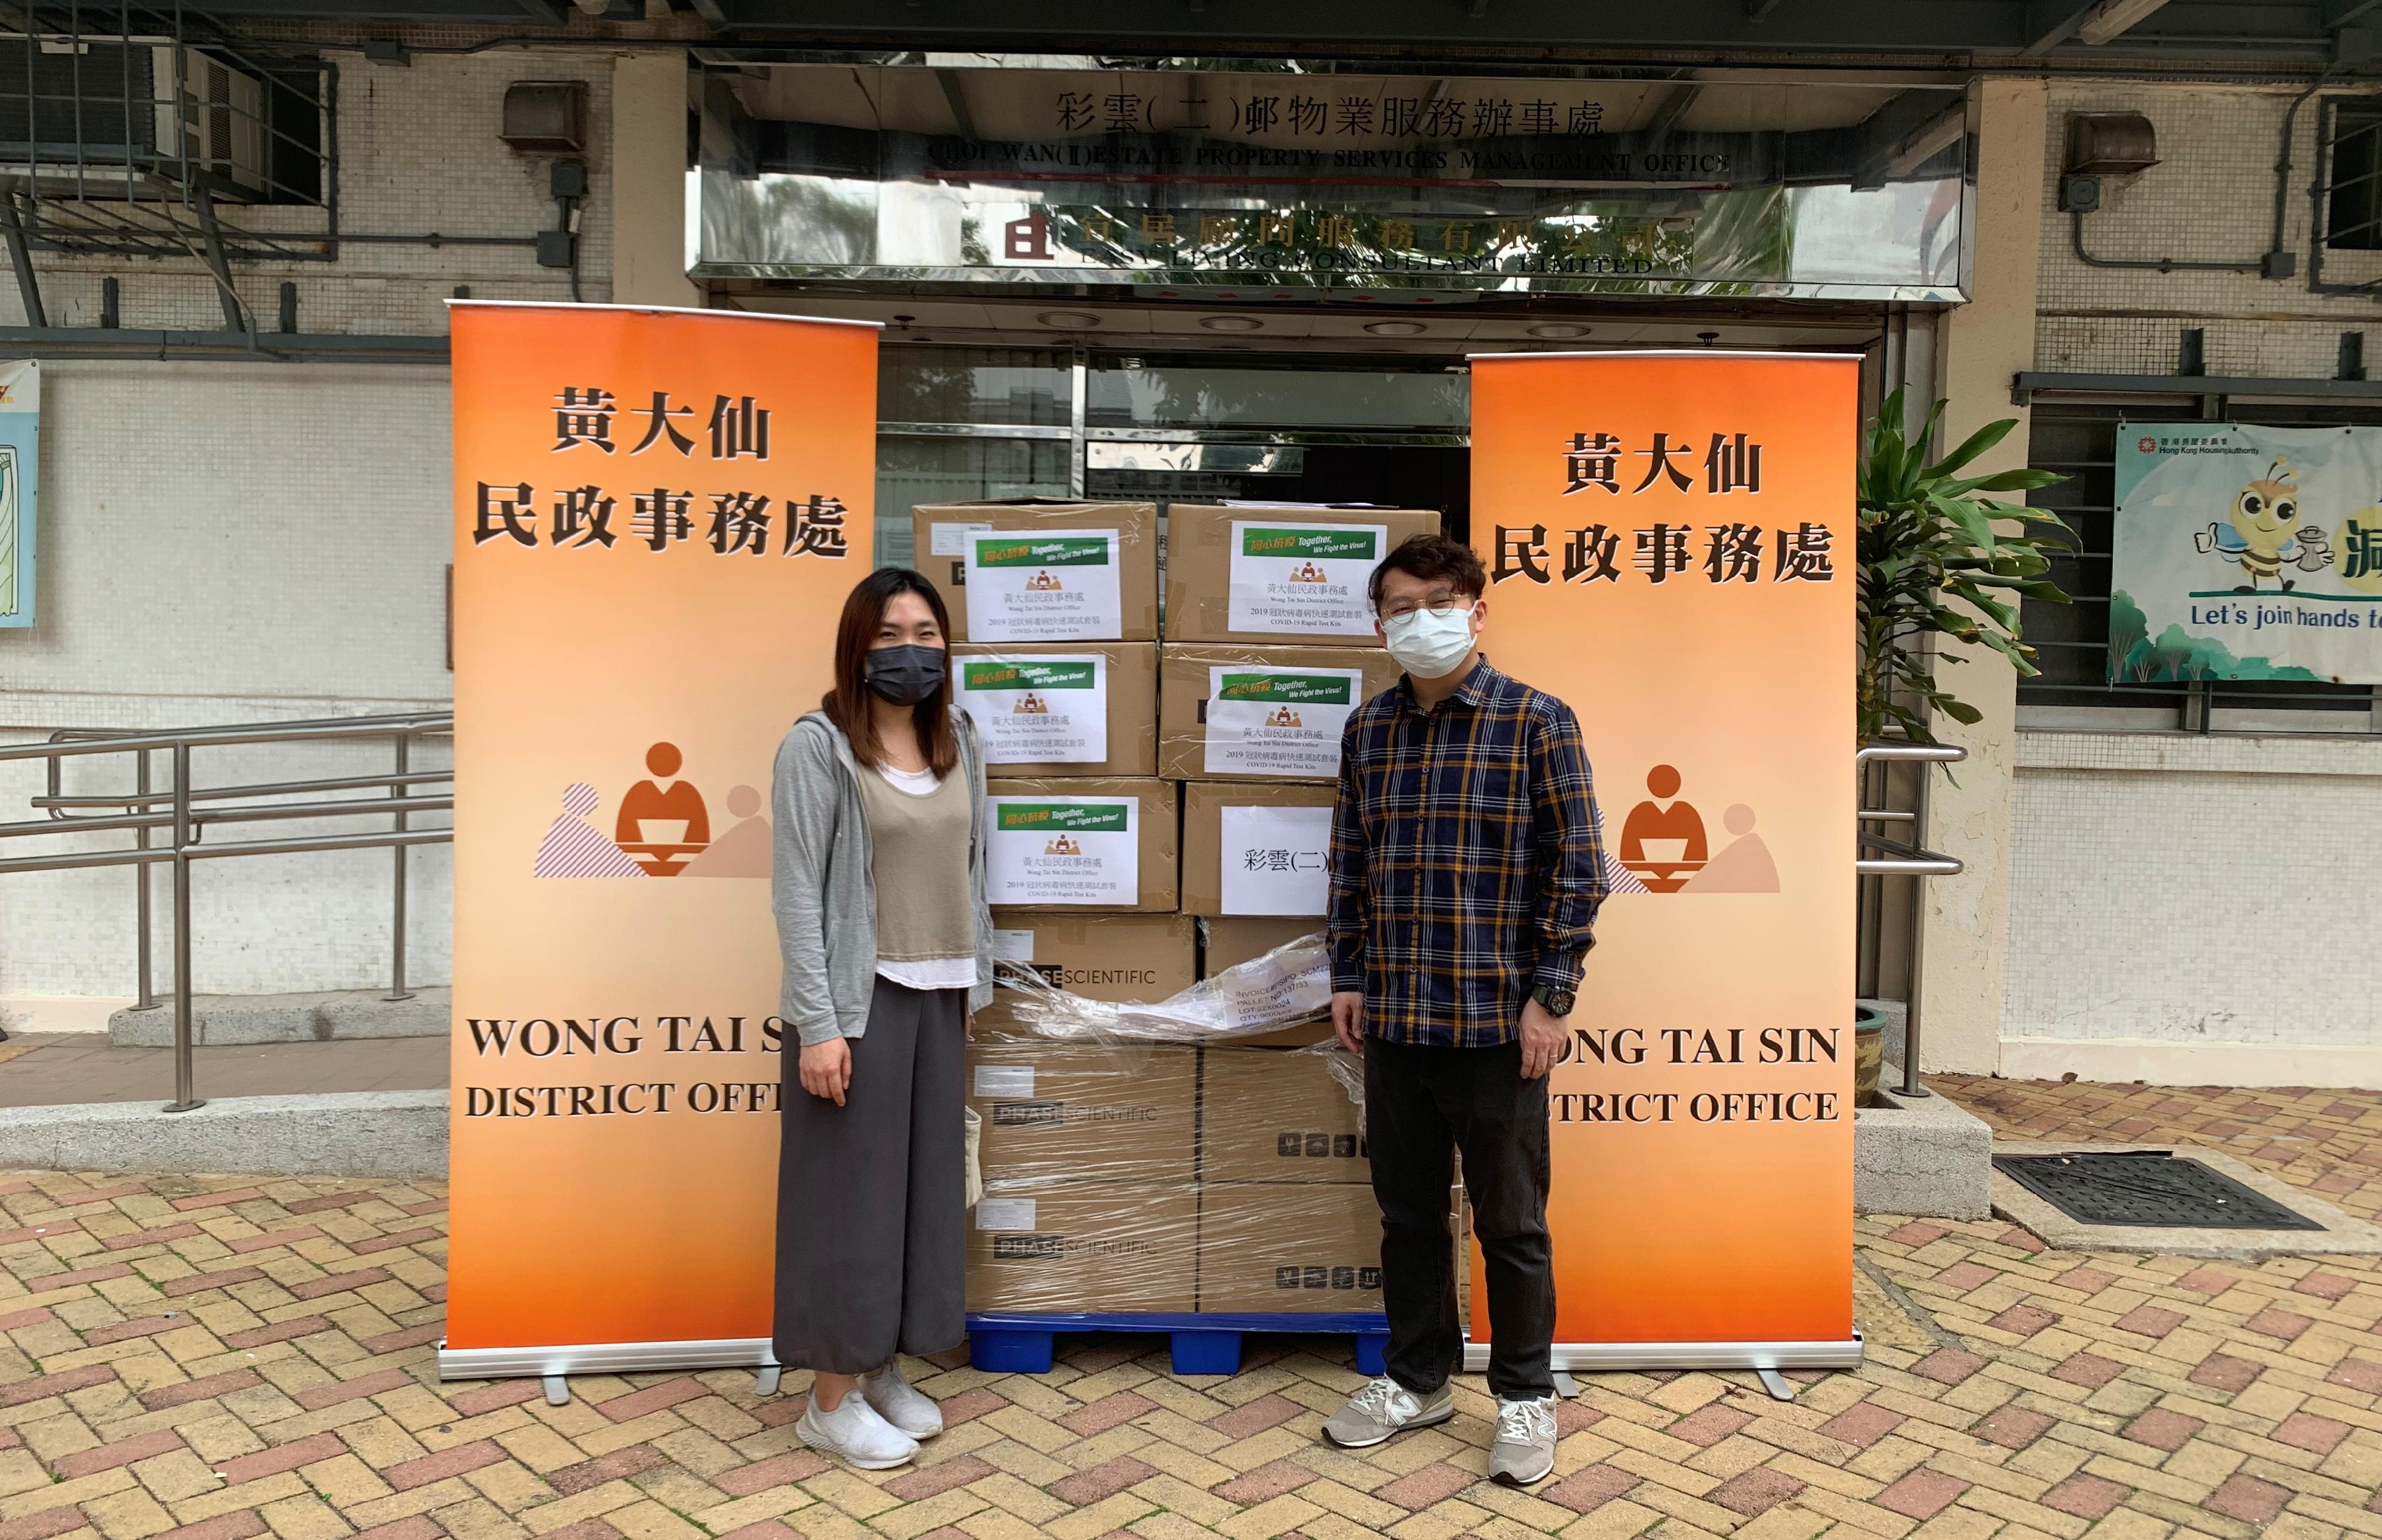 The Wong Tai Sin District Office today (March 18) distributed COVID-19 rapid test kits to households, cleansing workers and property management staff living and working in Choi Wan (ll) Estate for voluntary testing through the property management company.